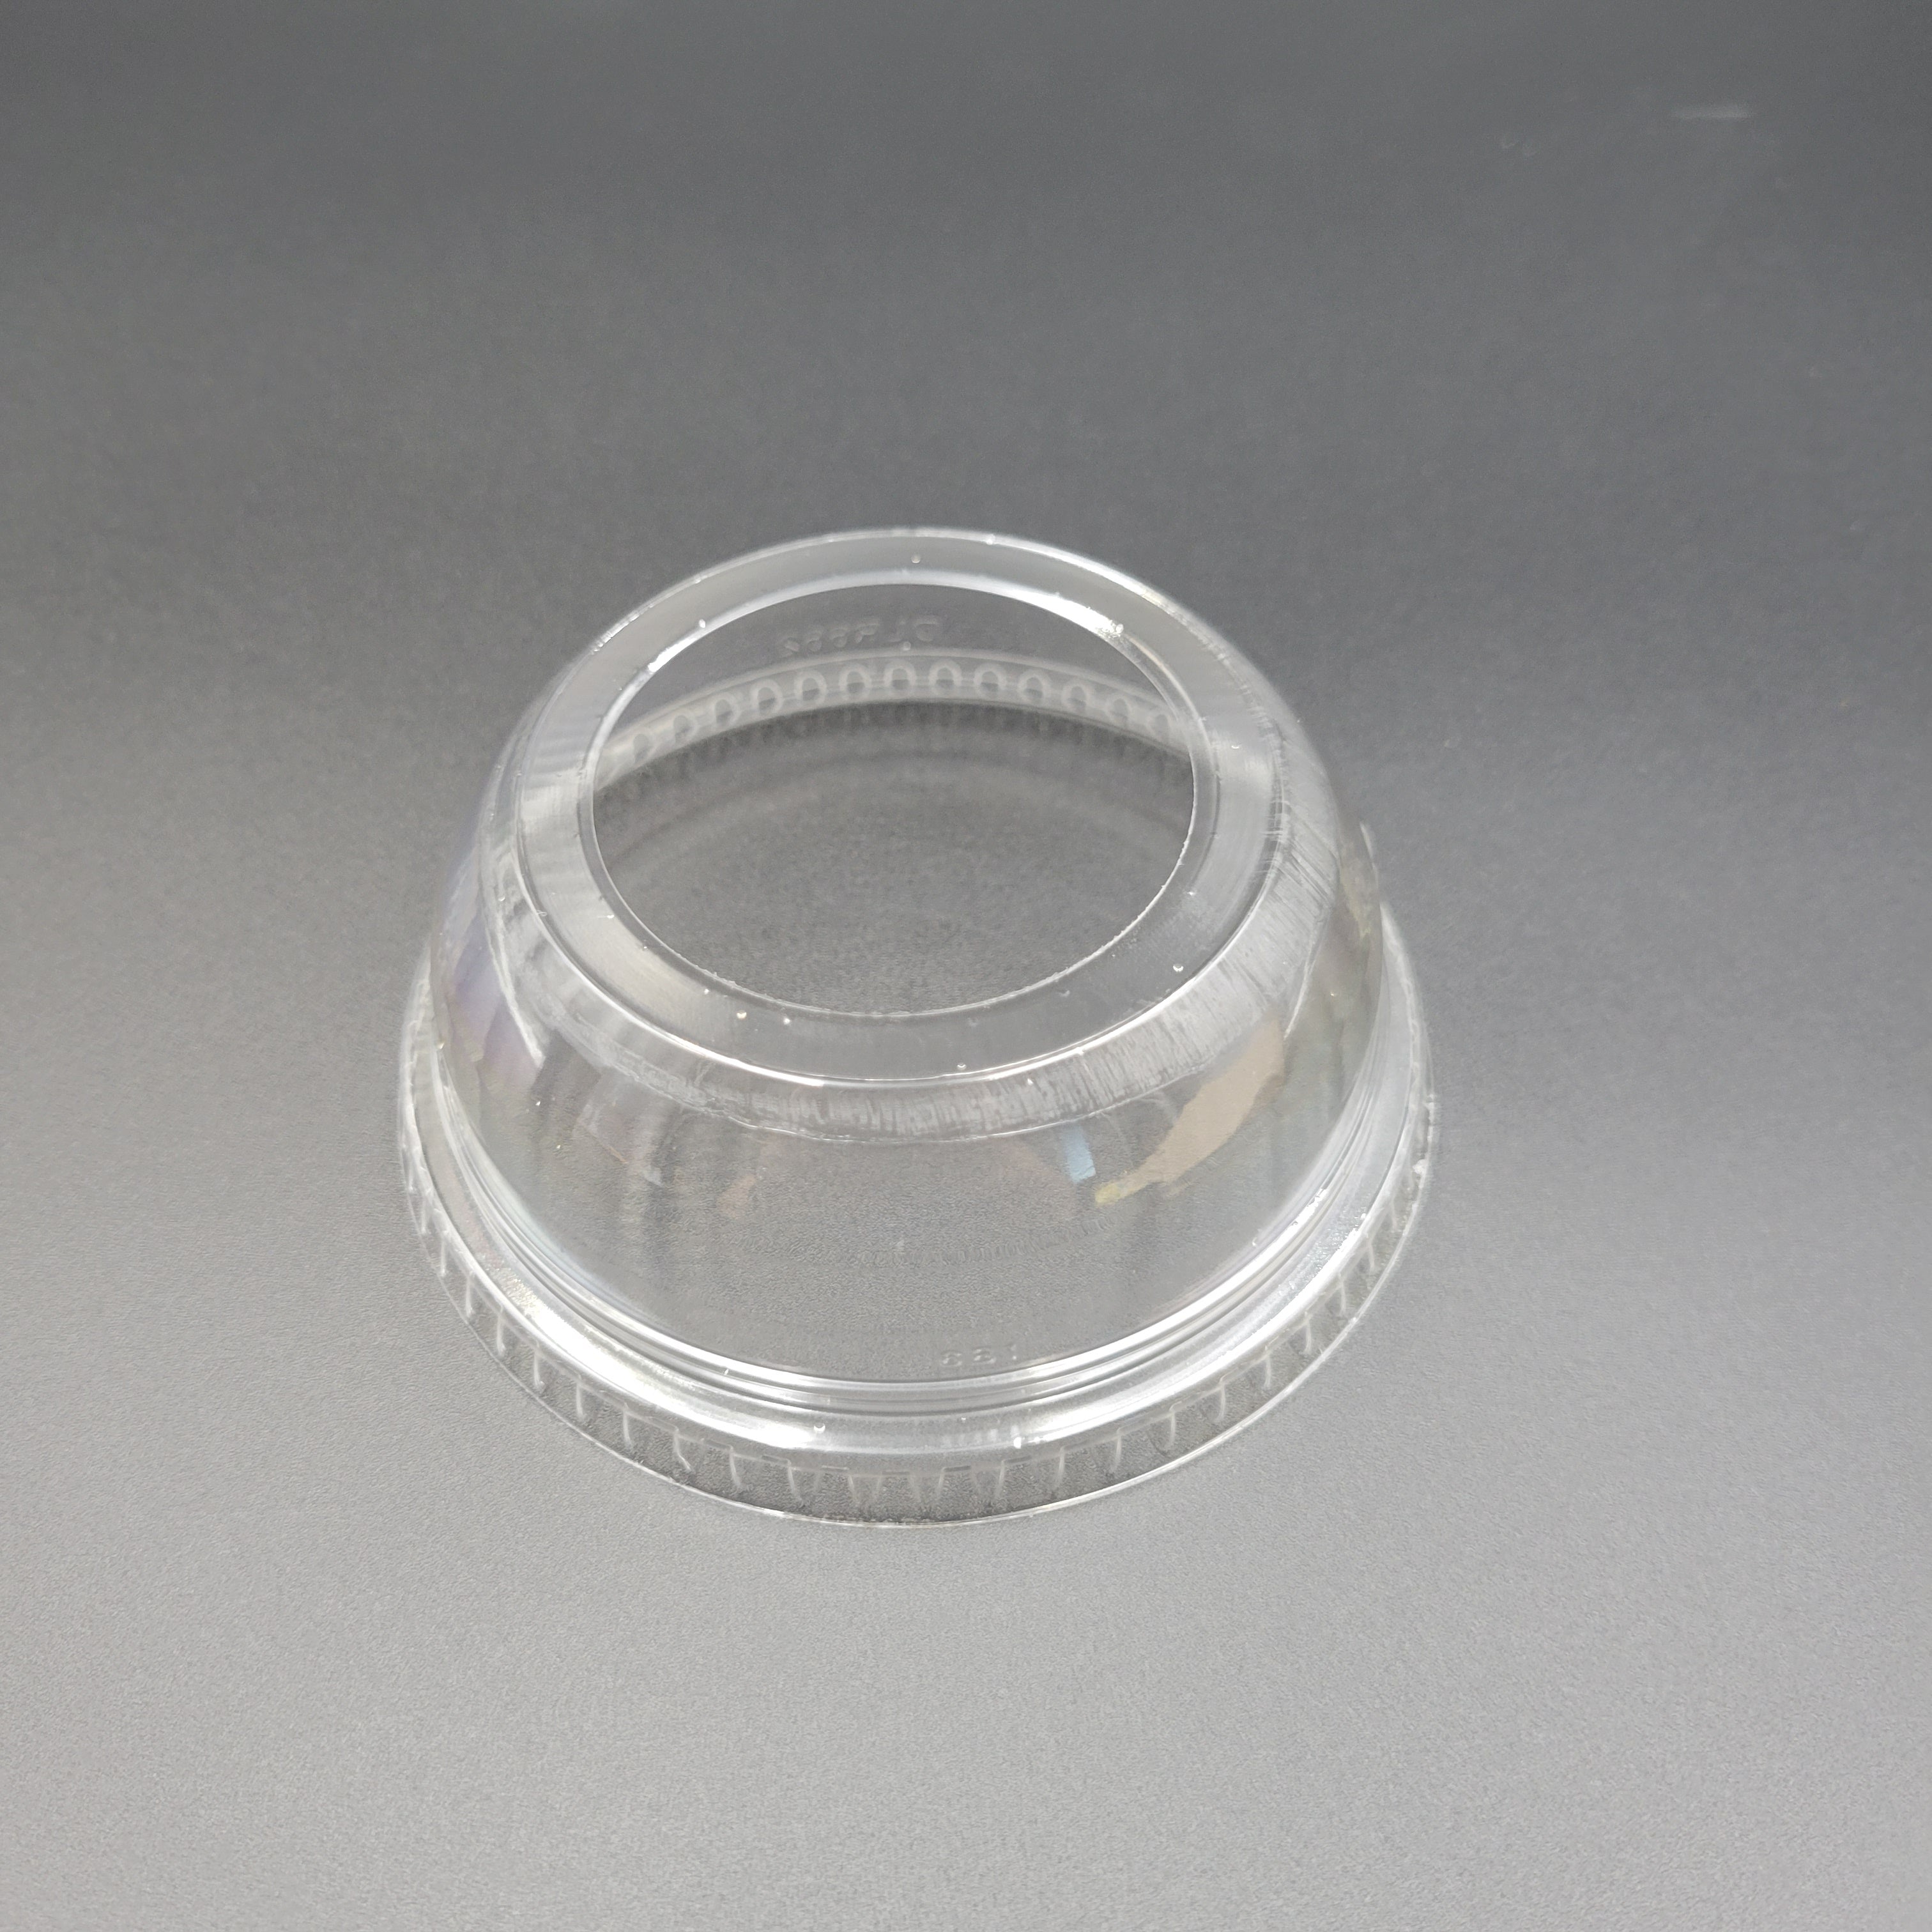 Dart Mfg. Clear Dome Lid With Big Hole For 9-12 oz. Clear Cups DLW662 - 1000/Case